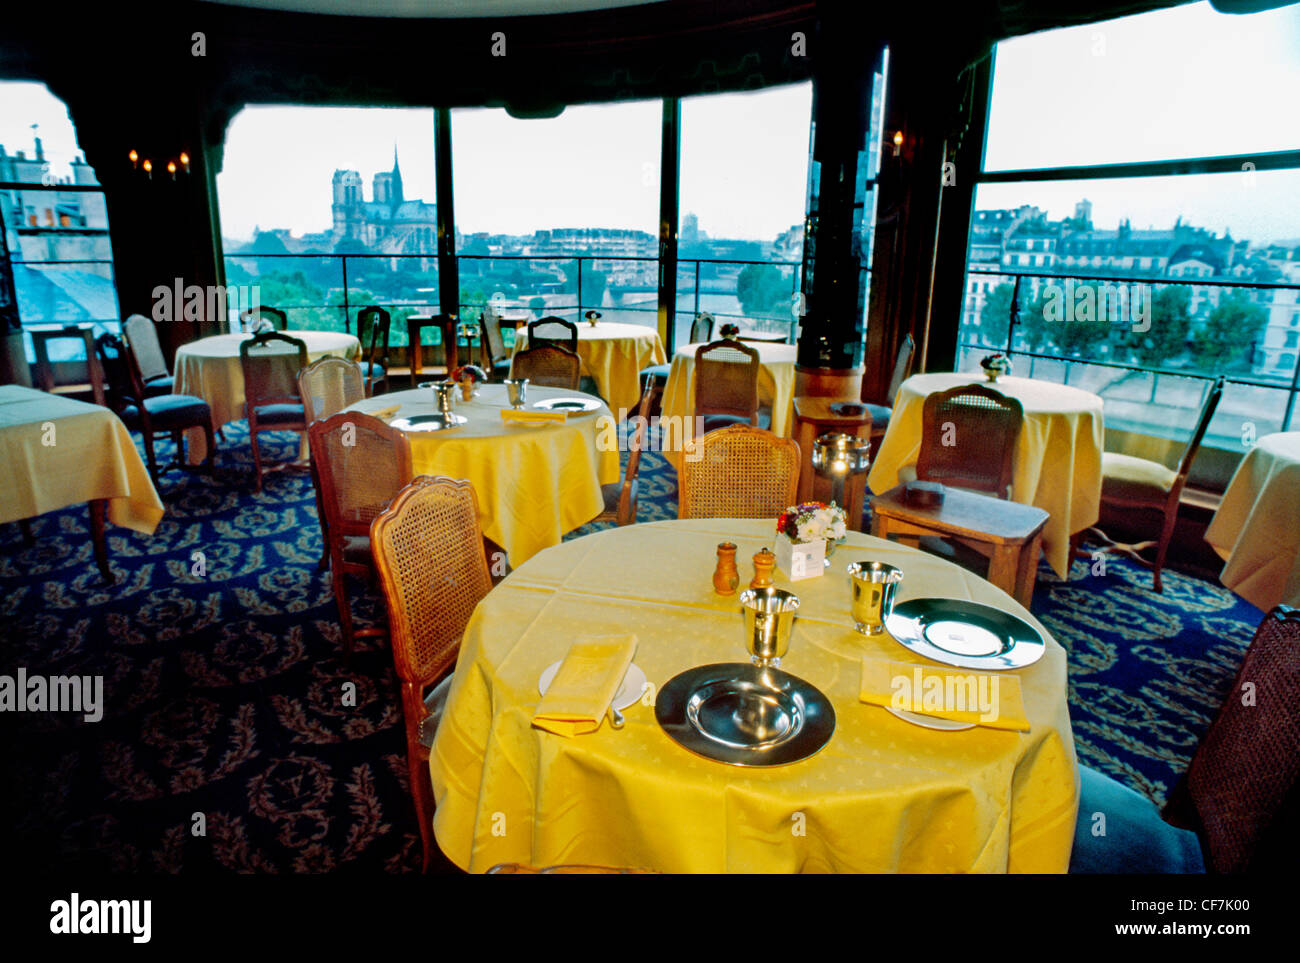 France, Paris, Inside Fancy French Restaurant 'La Tour d'Argent', Haute-Cuisine, Dining Room With Panoramic View of City Stock Photo